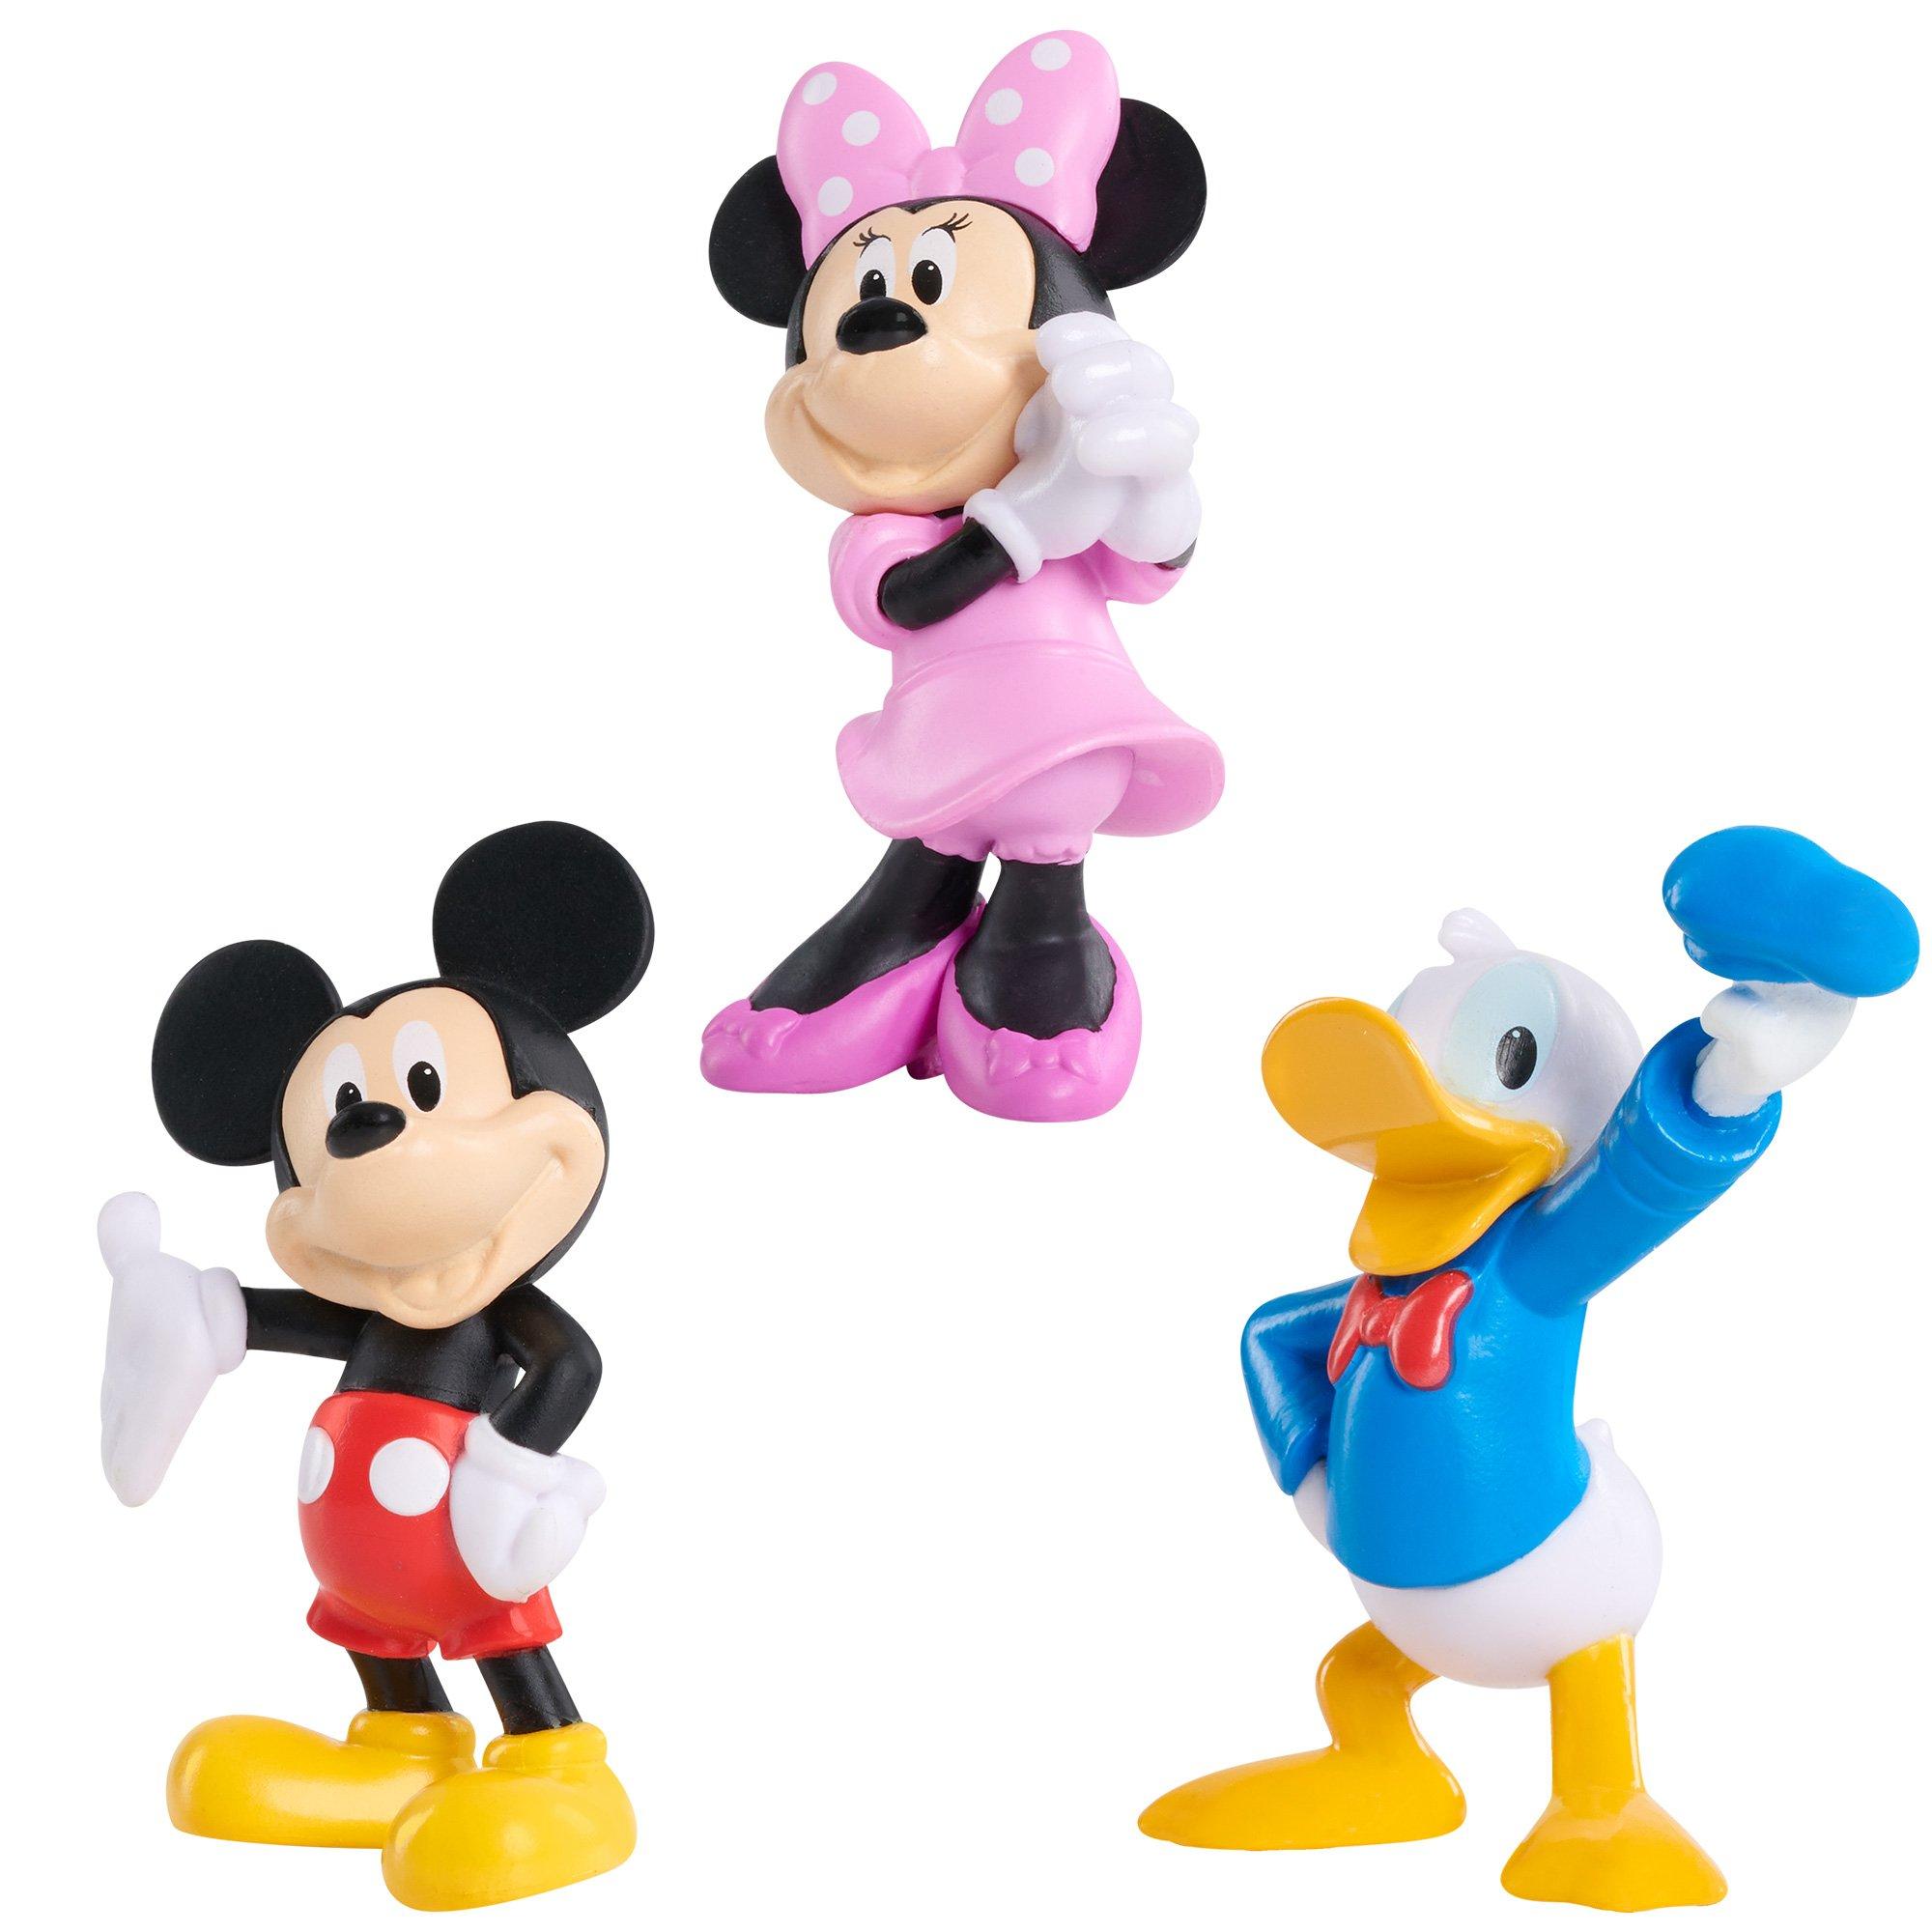 Mickey Mouse Toys in Mickey Mouse 